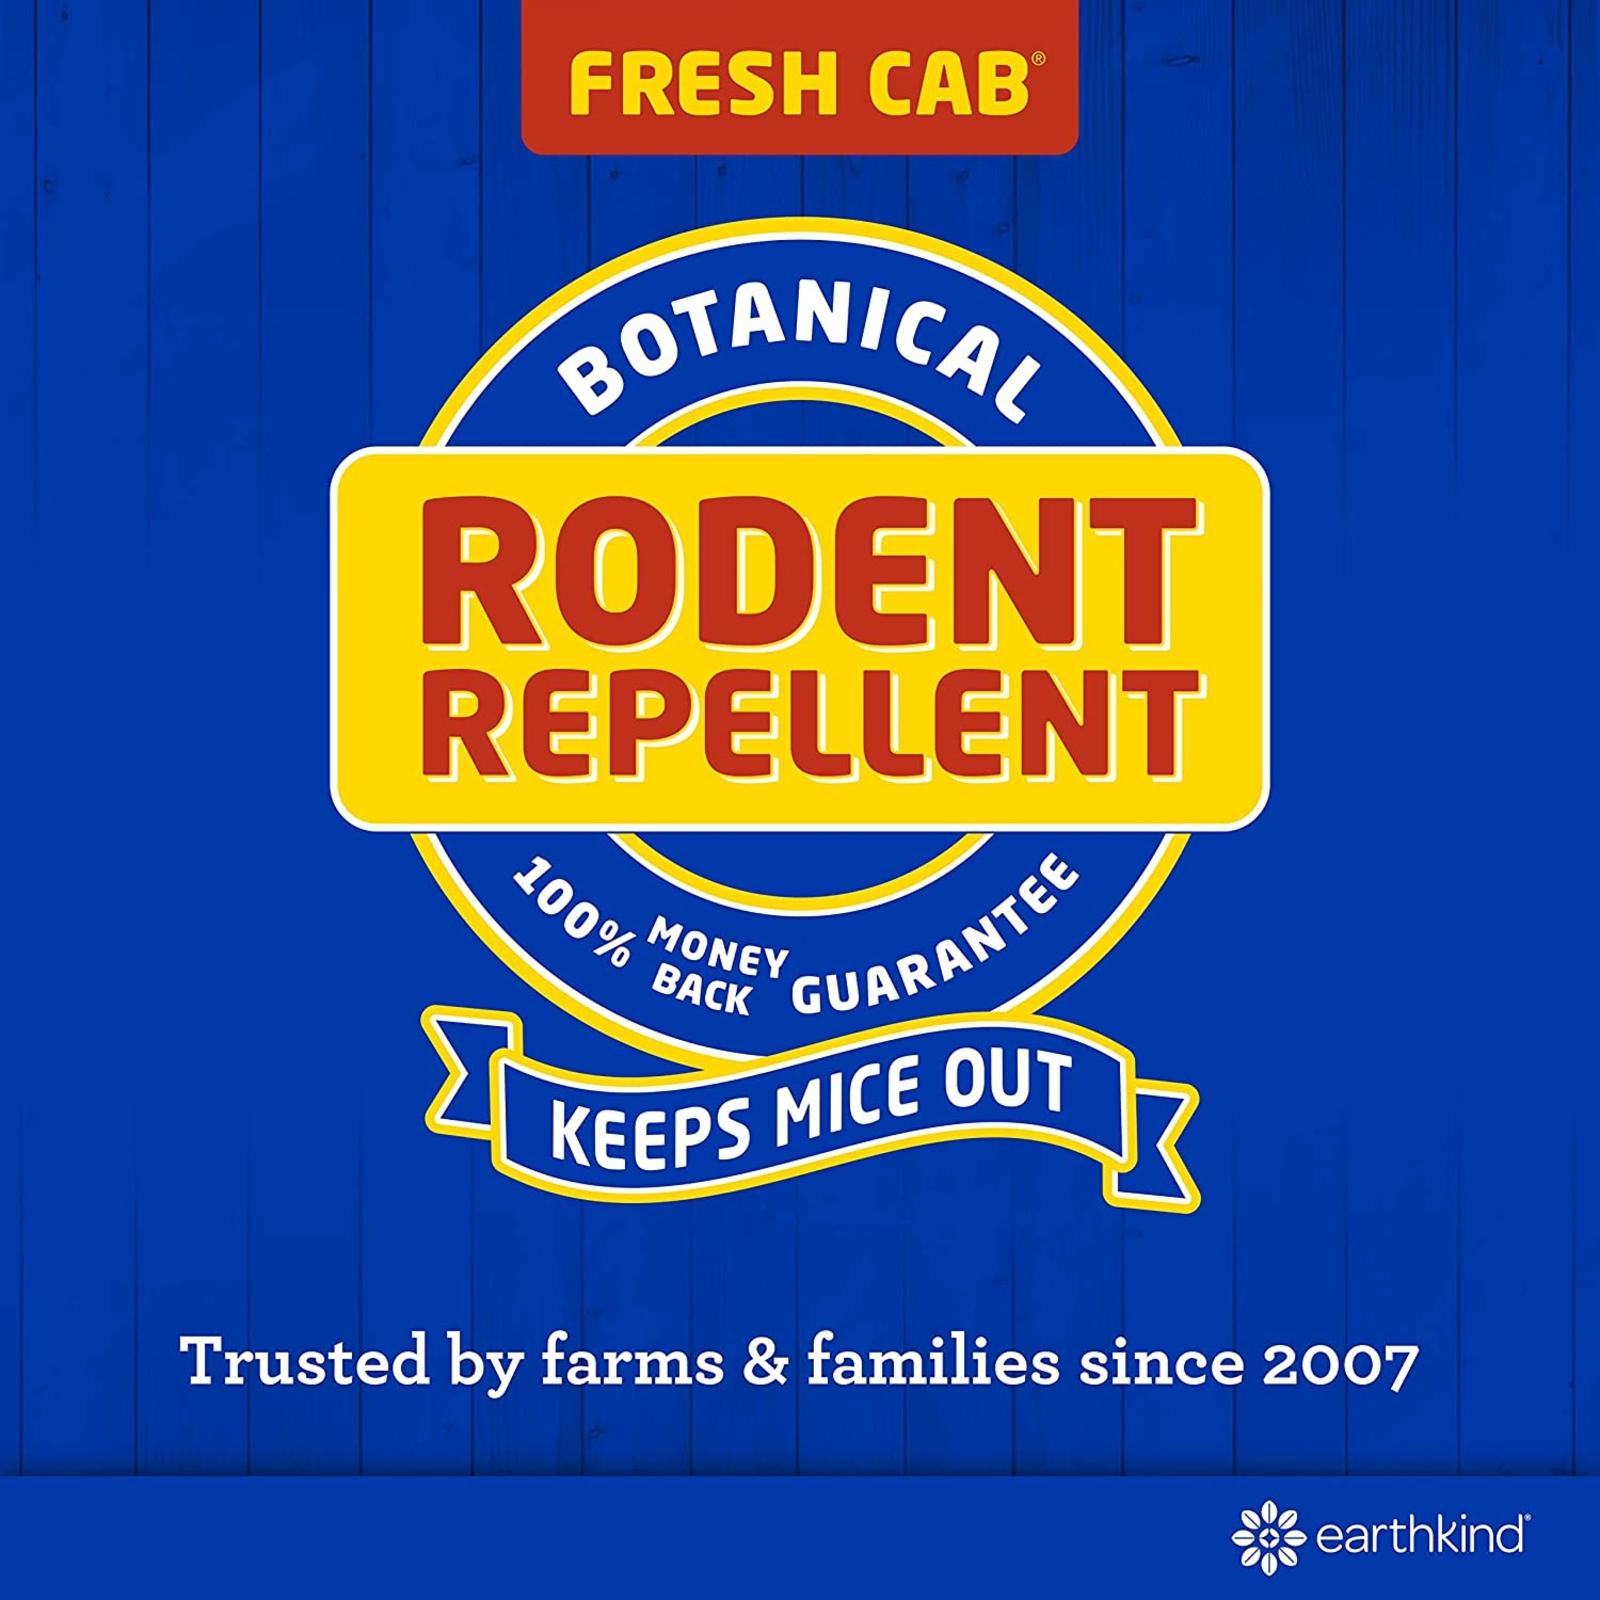 Fresh Cab 4-Pack Rodent Repellent